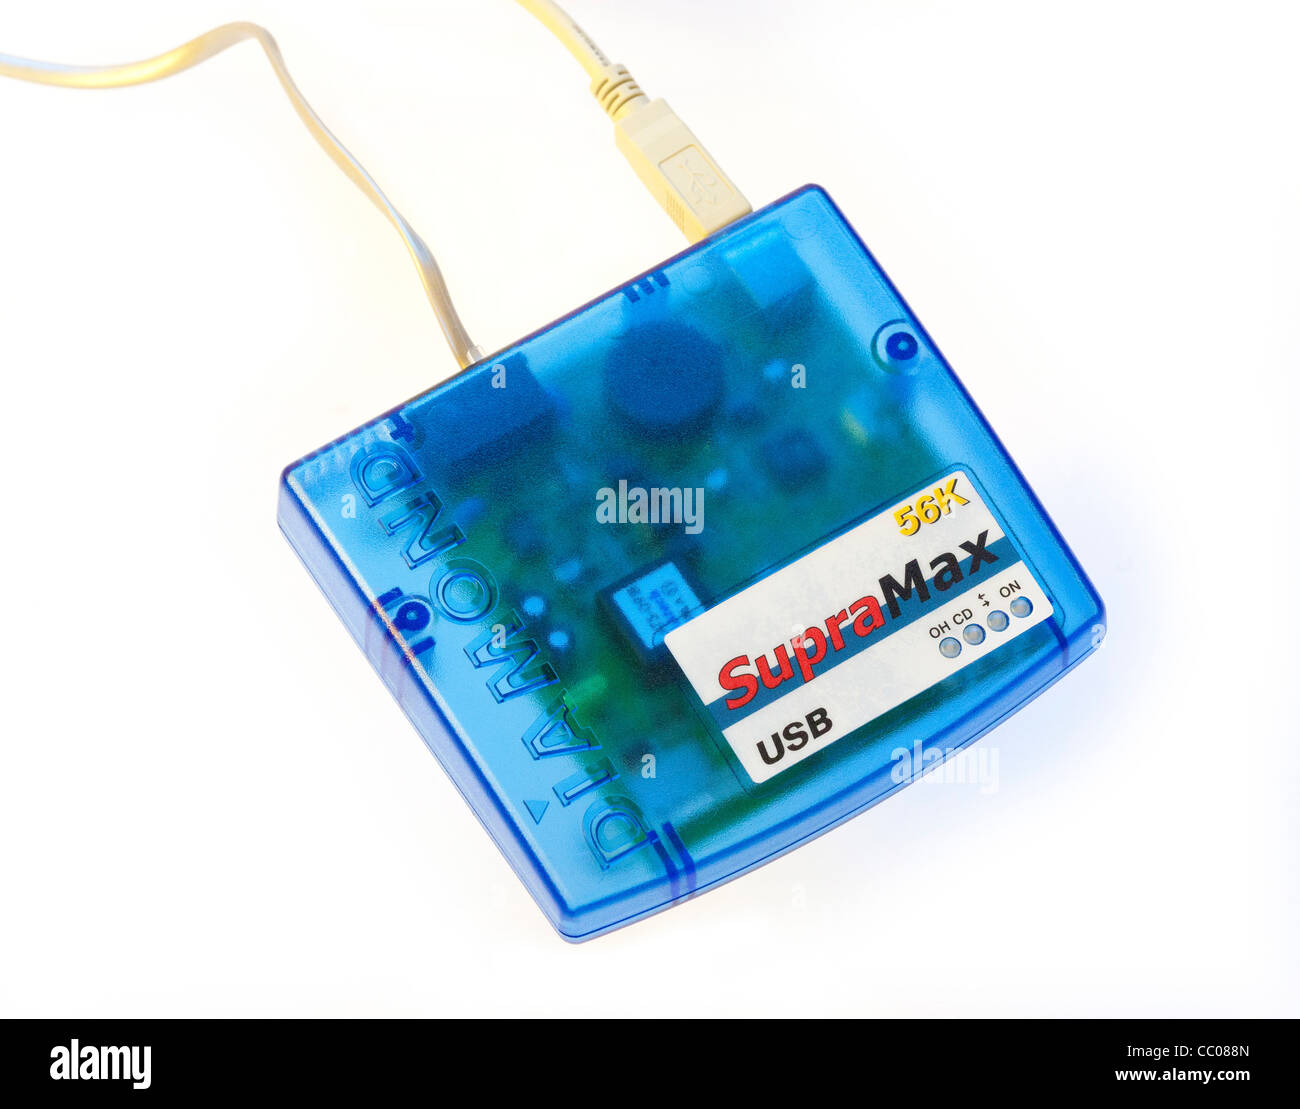 dial up internet 56Kbps connection Photo - Alamy